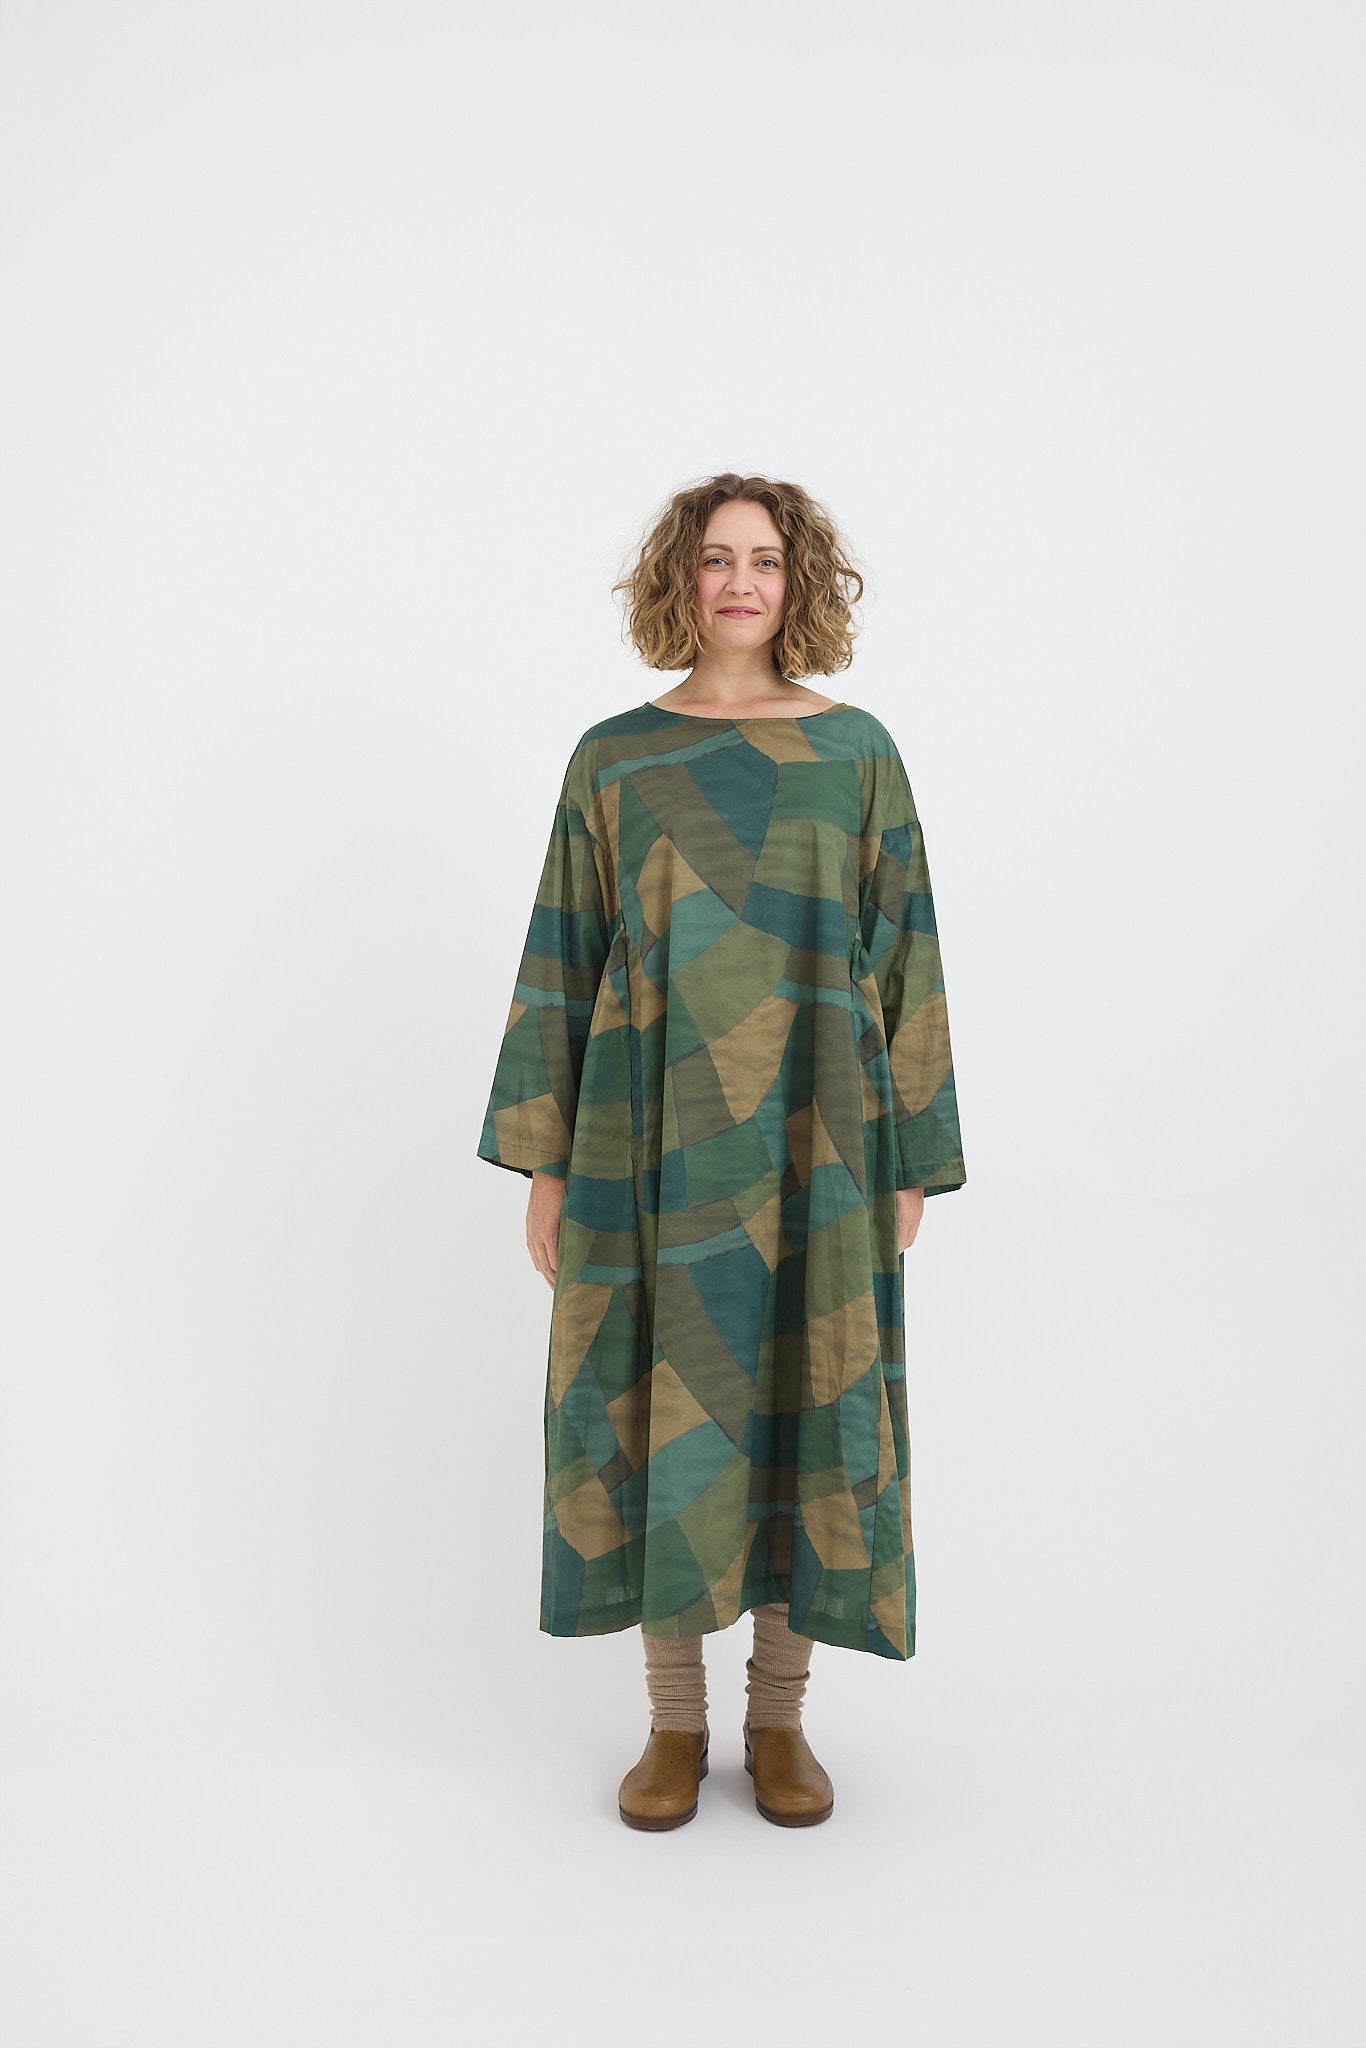 Olive Dress - Liberty Of London Cotton - Melbourne Made